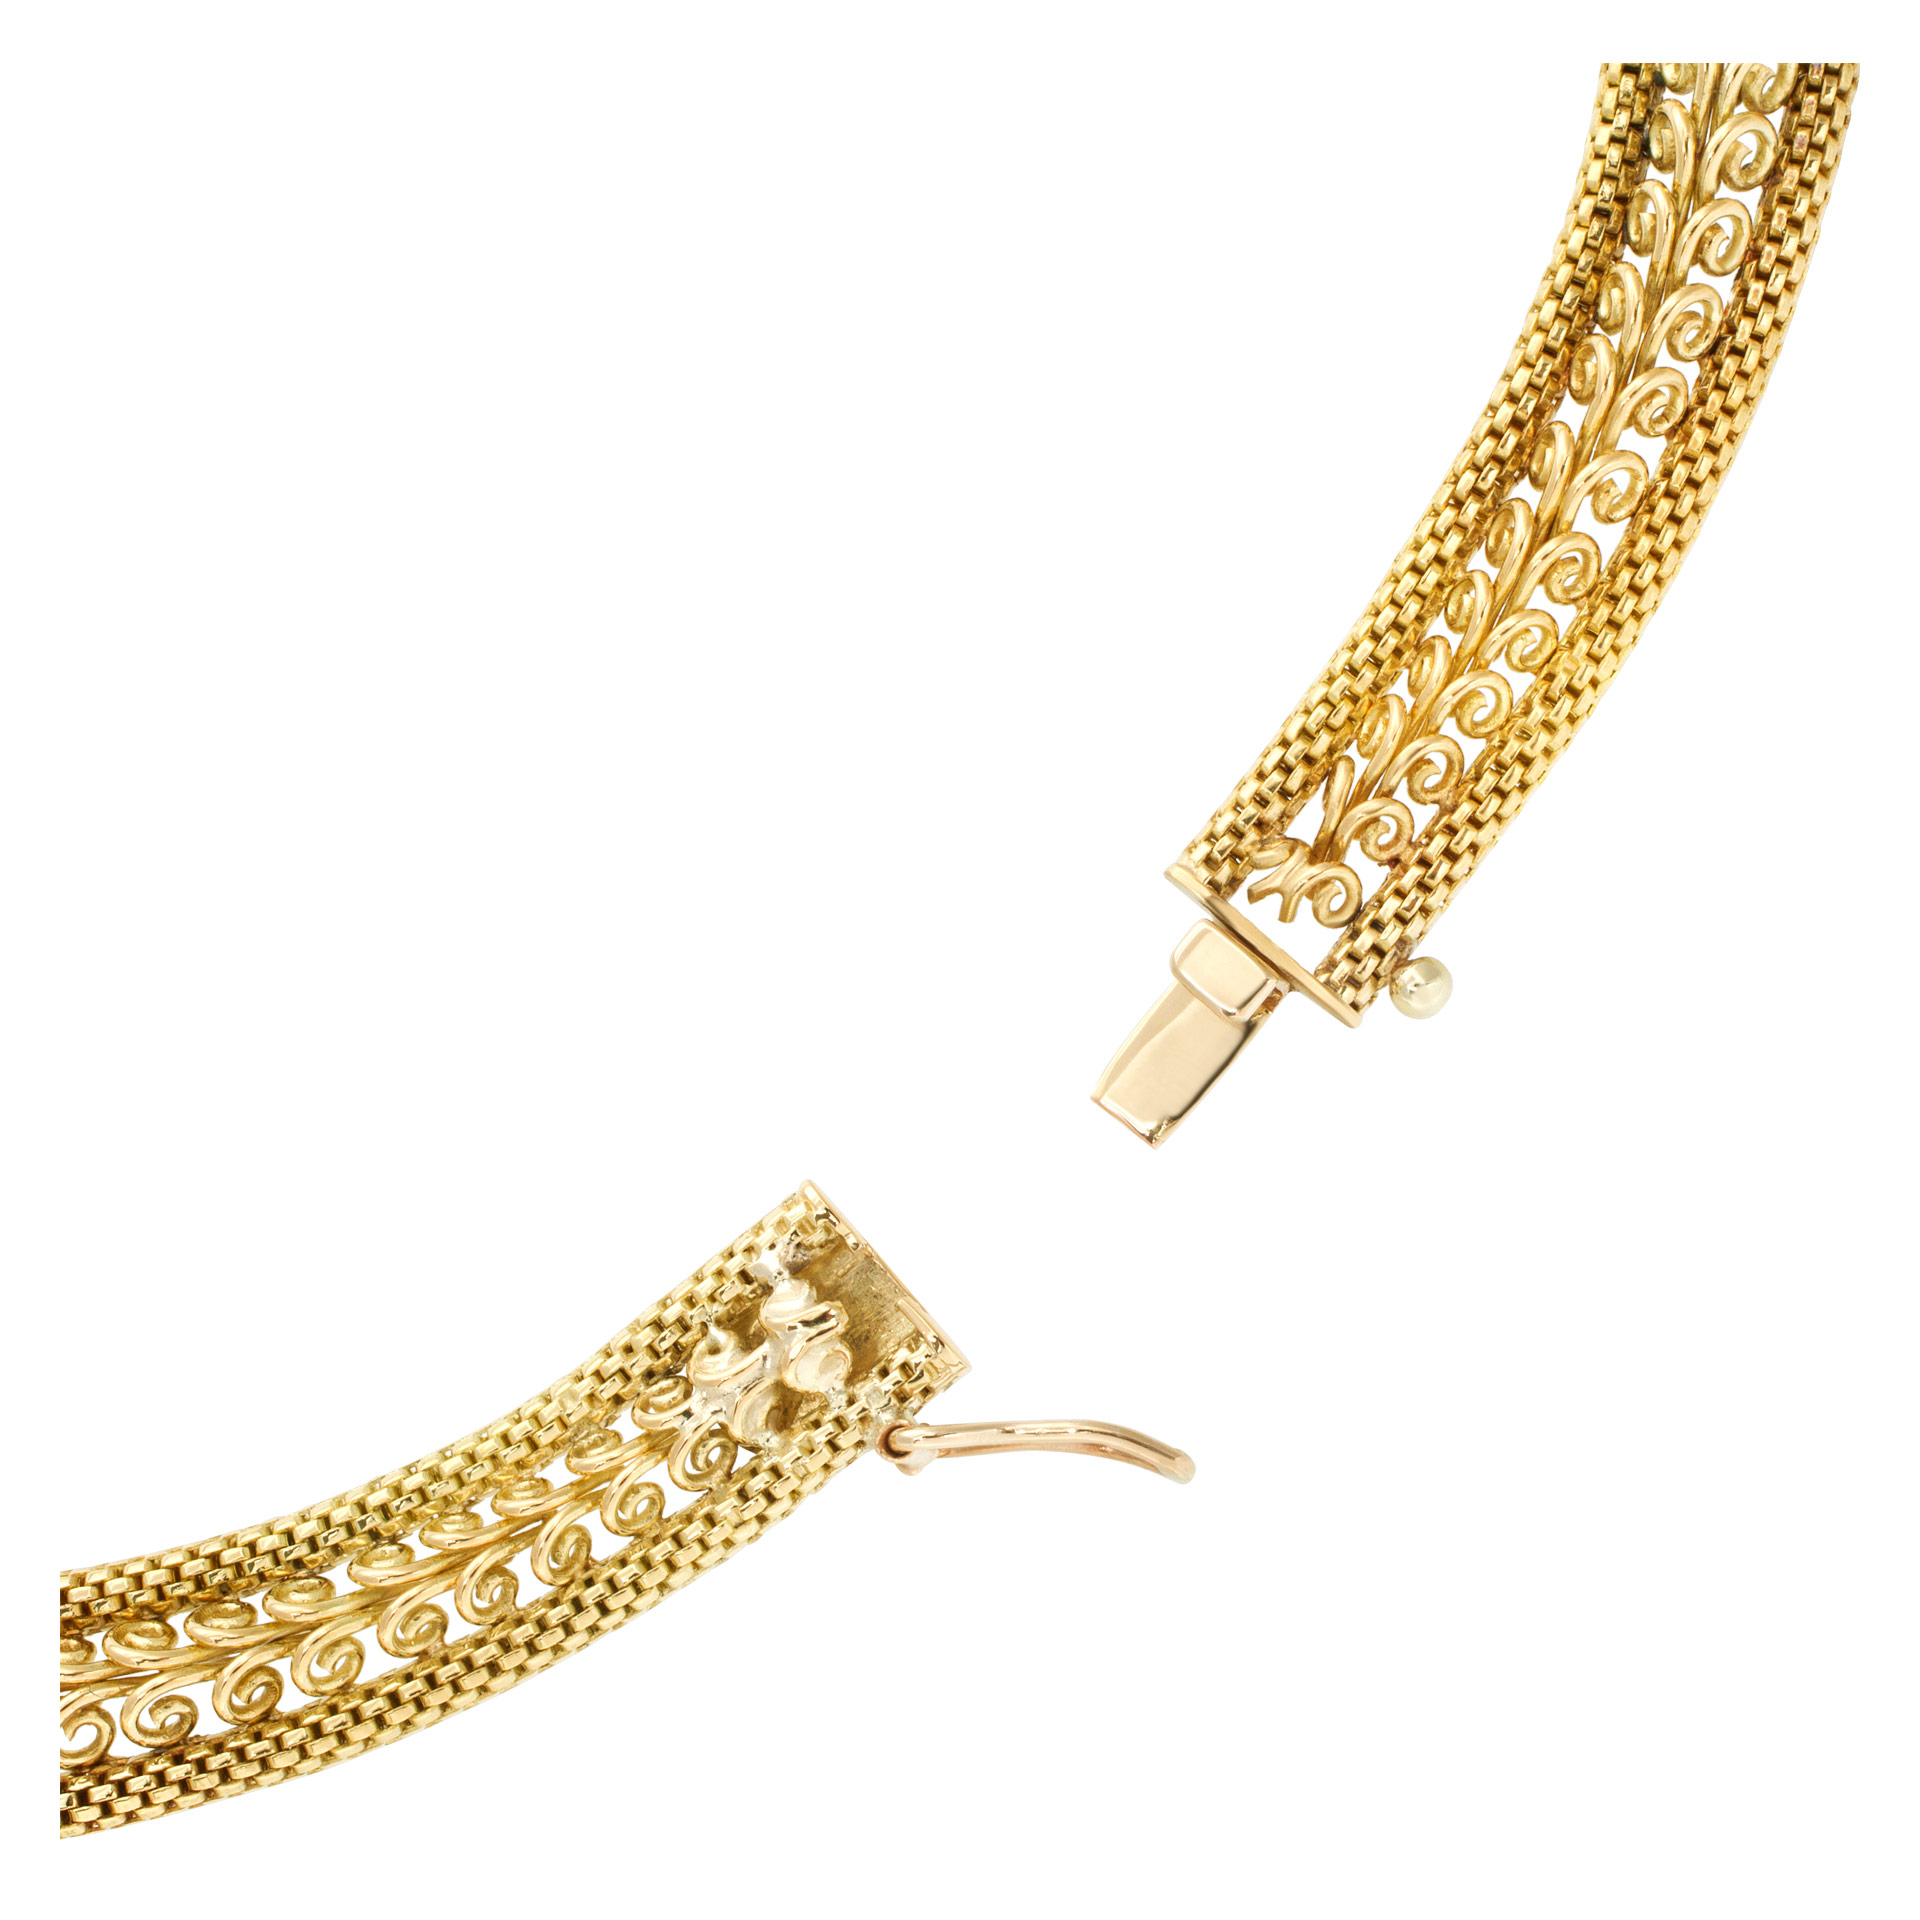 Swirl link choker necklace with diamond accents in 18k (Stones) image 6